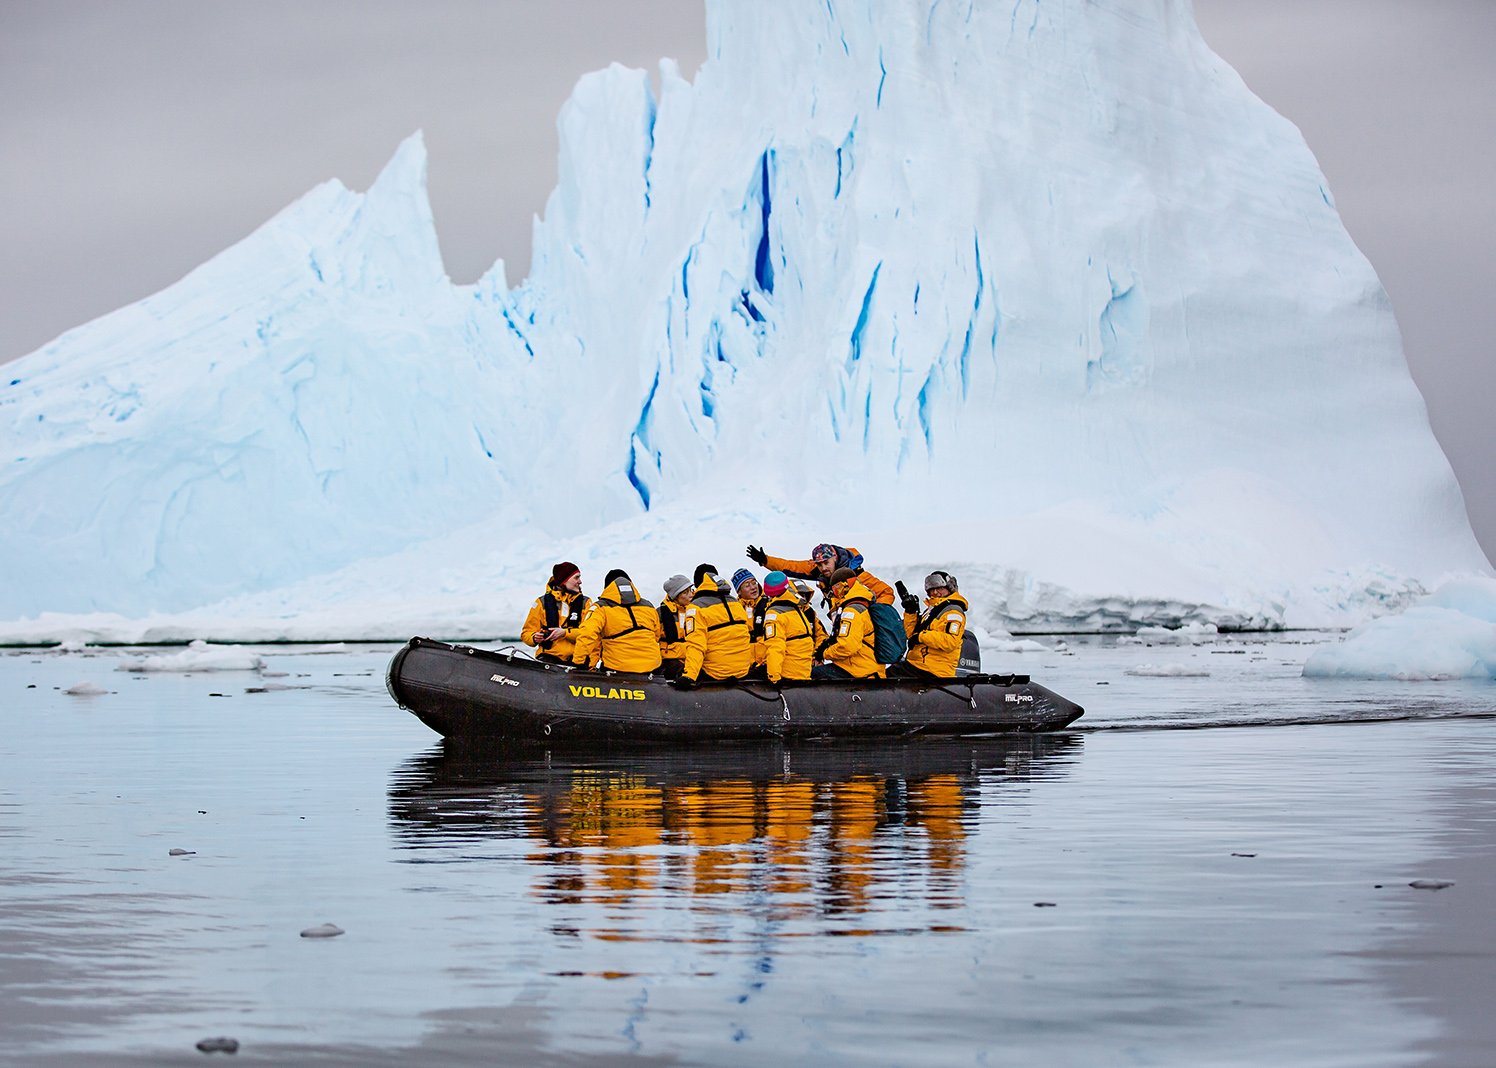 Guests of Quark Expeditions enjoy a close-up view (within a safe distance) of an iceberg while on a Zodiac cruise. Such ice formations can be seen in various parts of Iceland and Greenland.